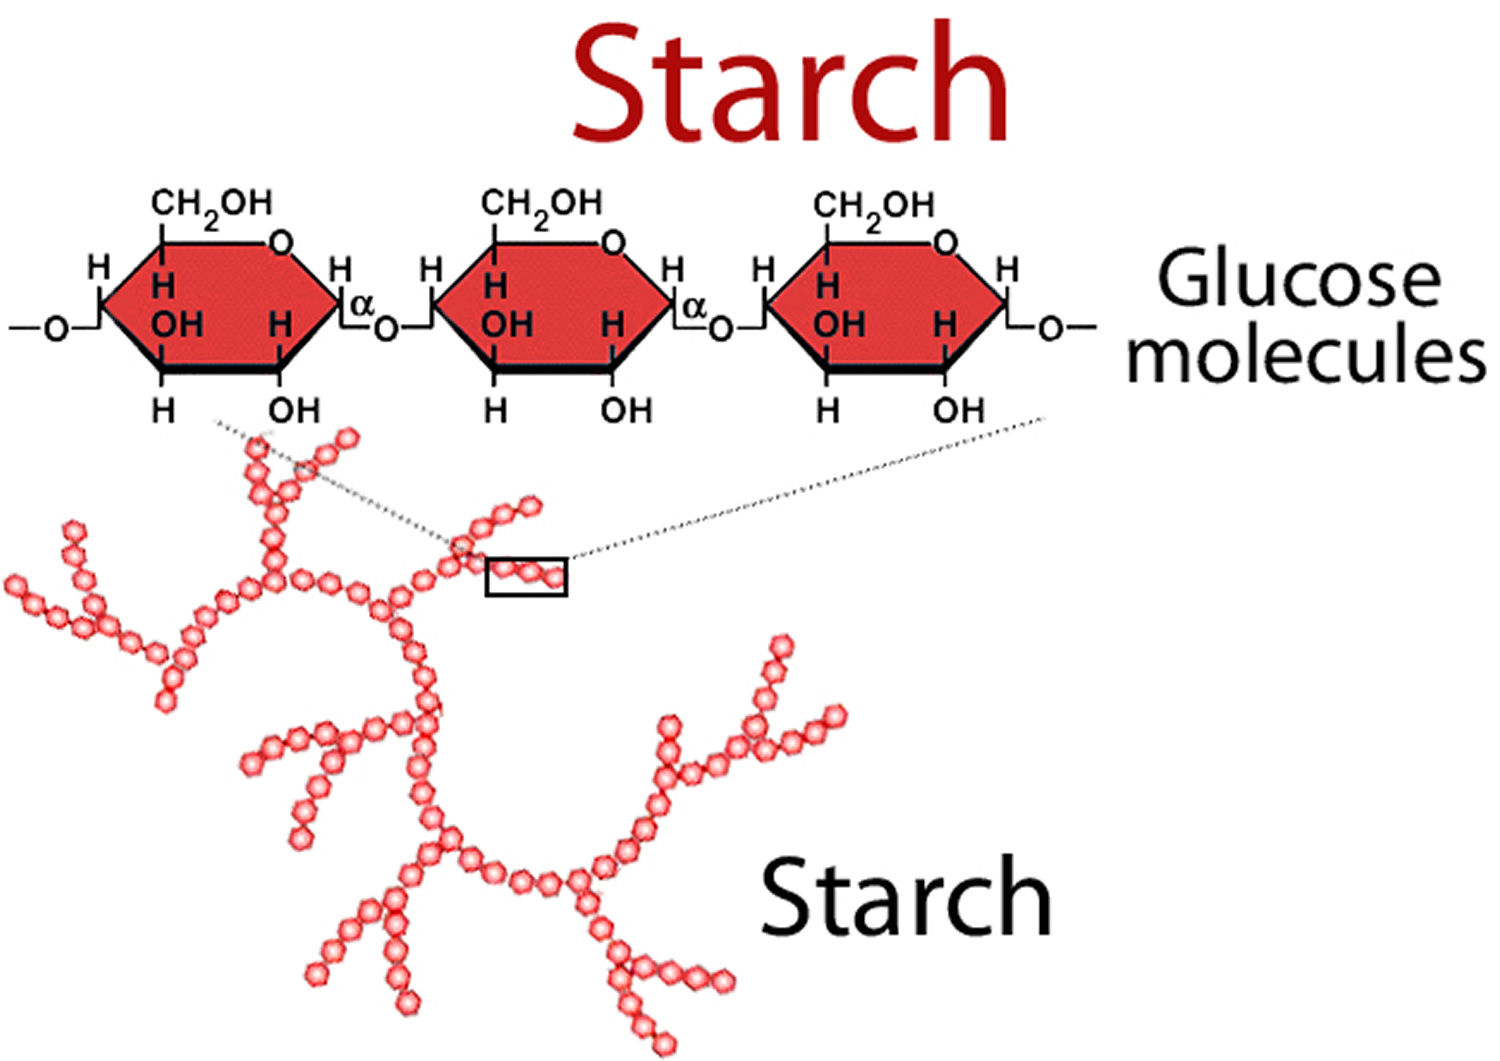 Starch structure